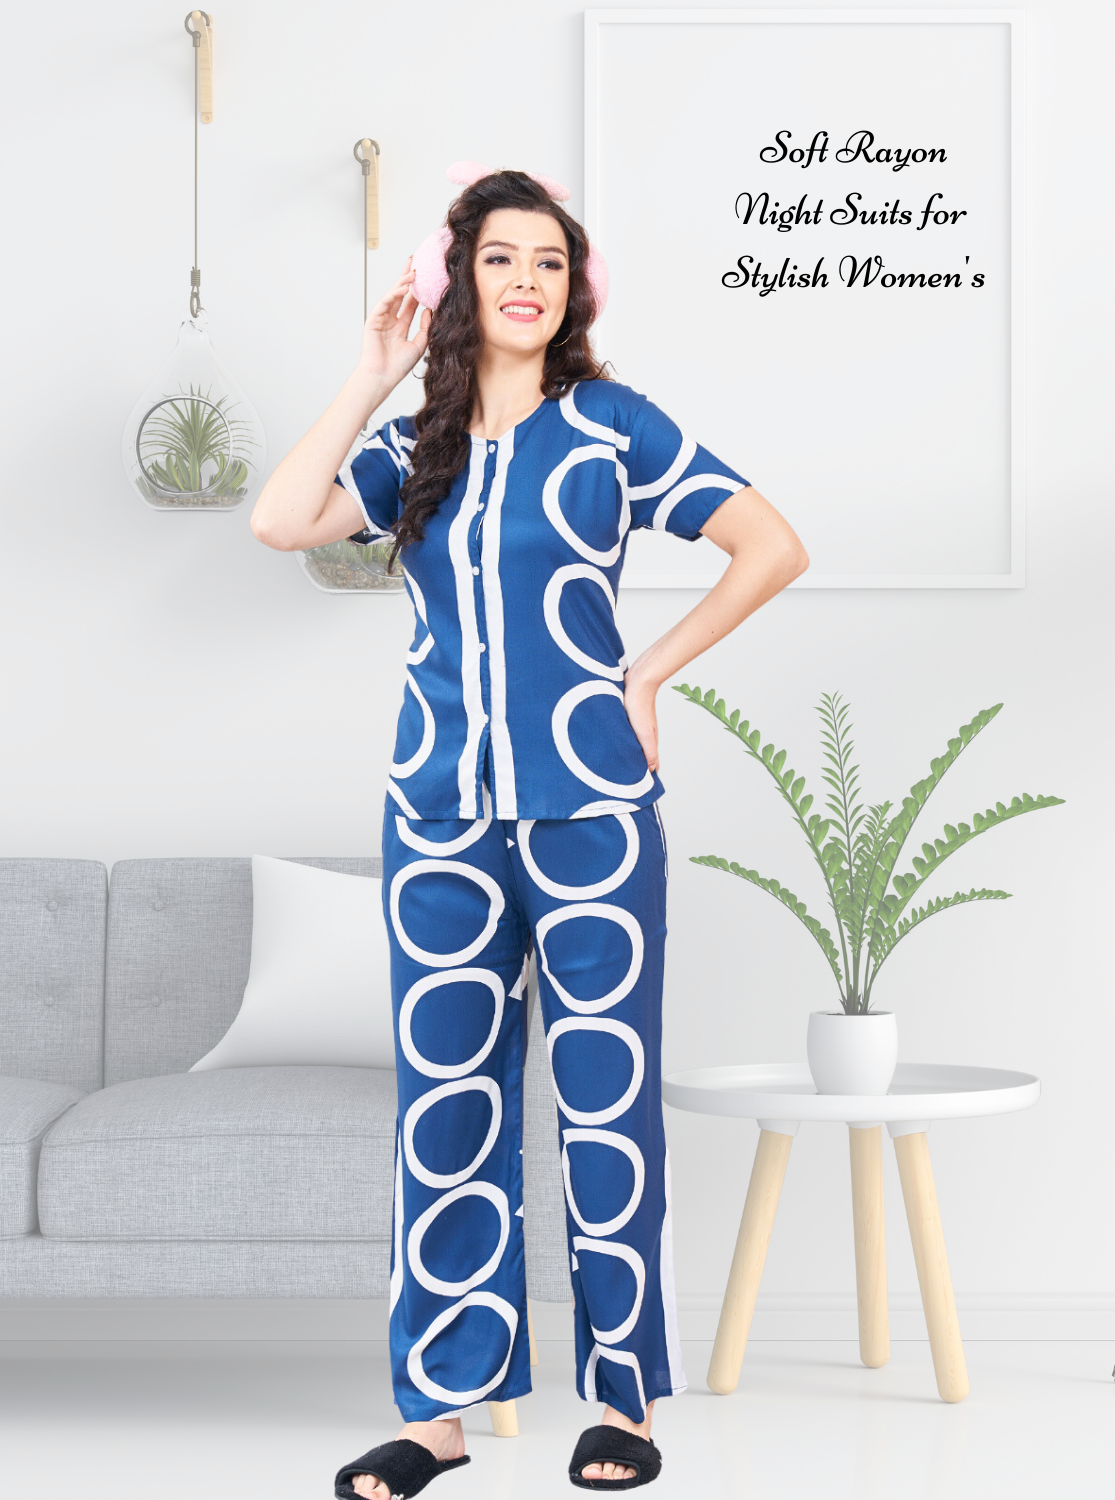 ONLY MINE Rayon Printed Top & Bottom Set Night Suits- Stylish Printed Top & Bottom Set for Trendy Women's